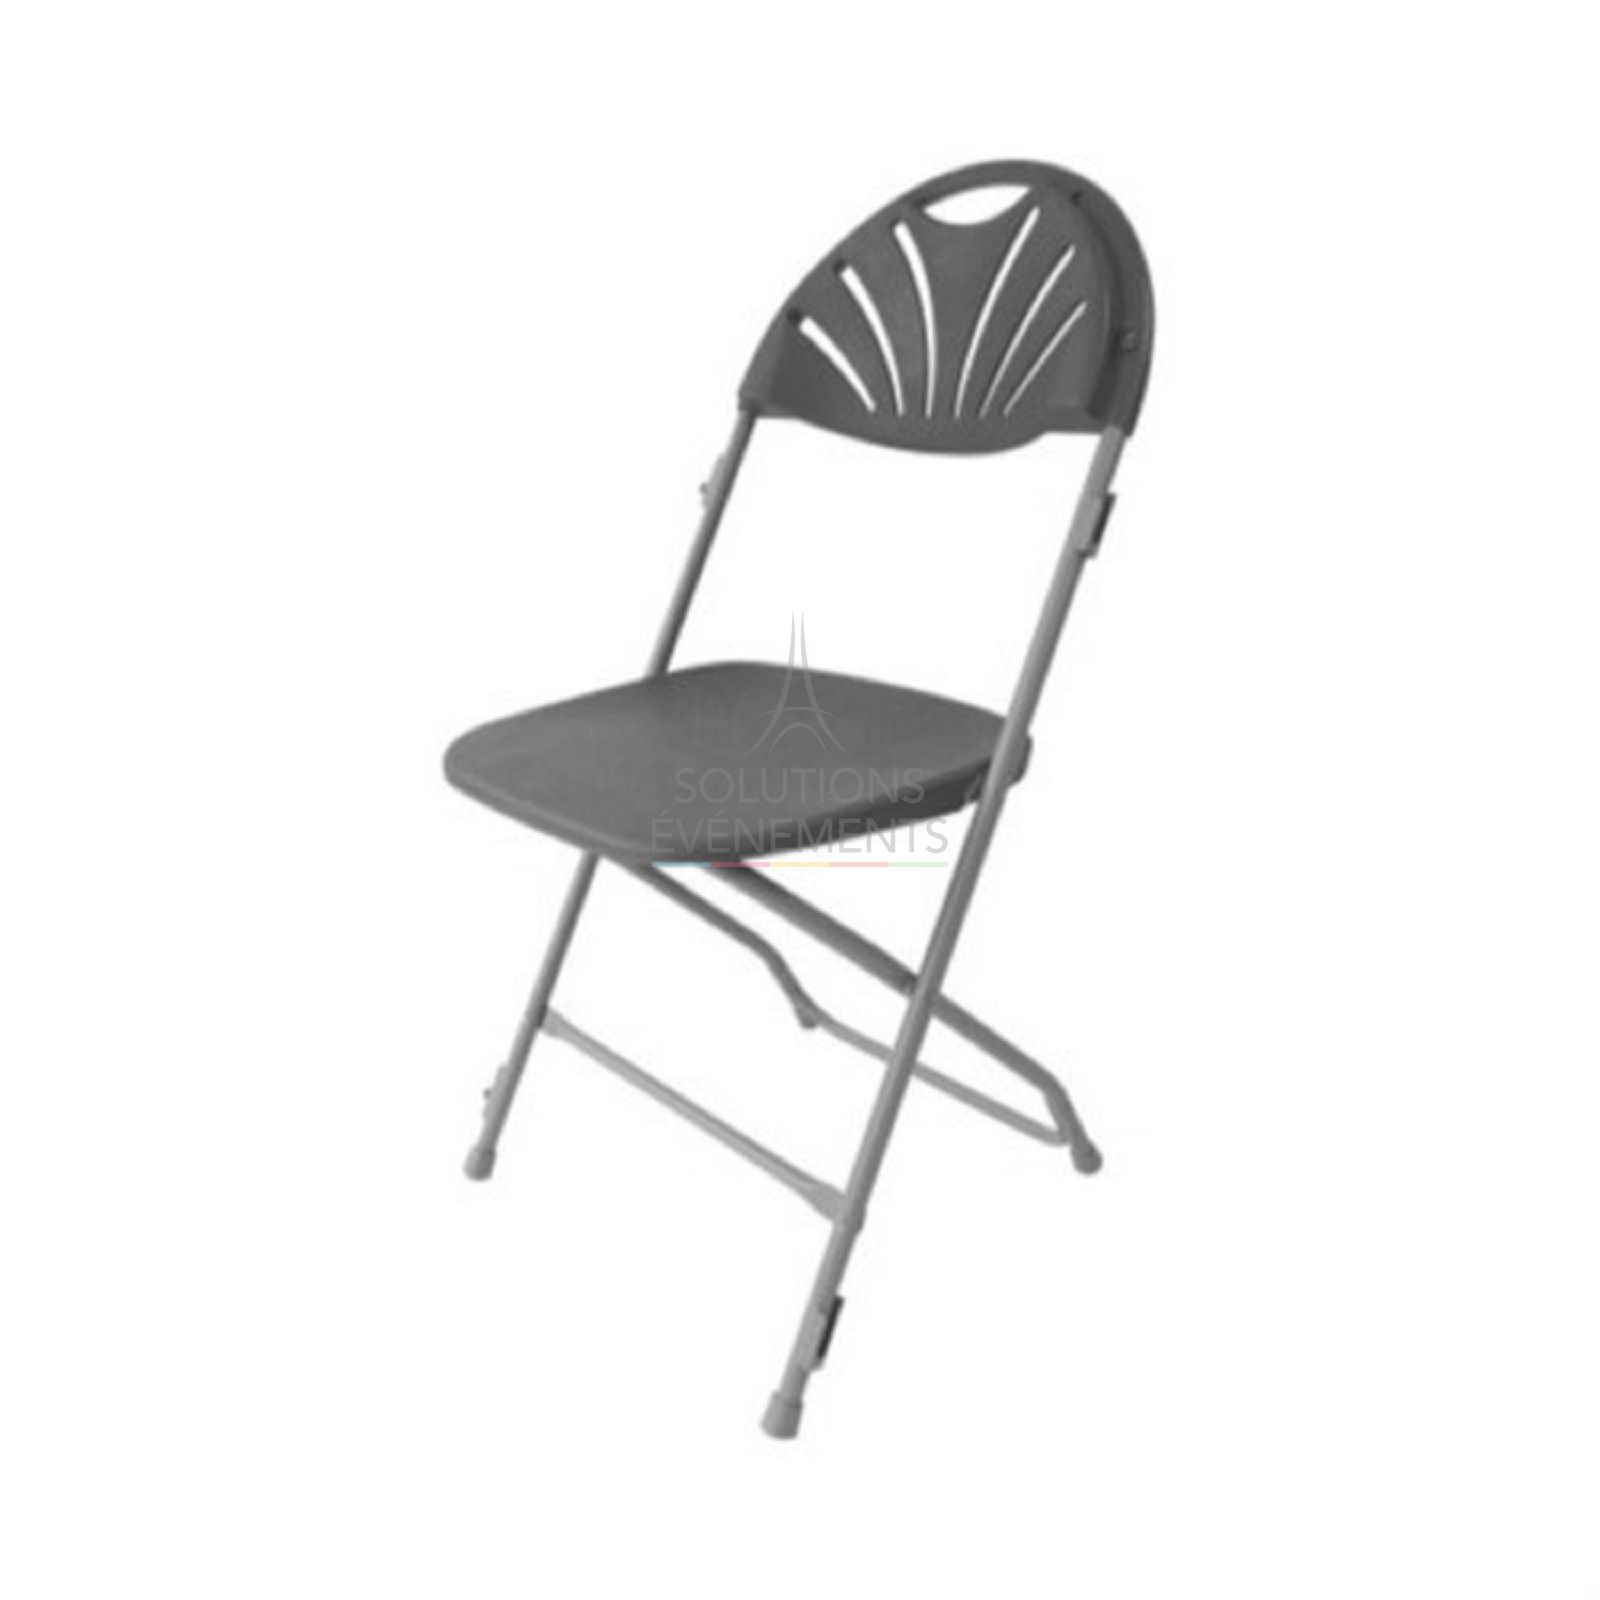 Economical and robust folding chair rental